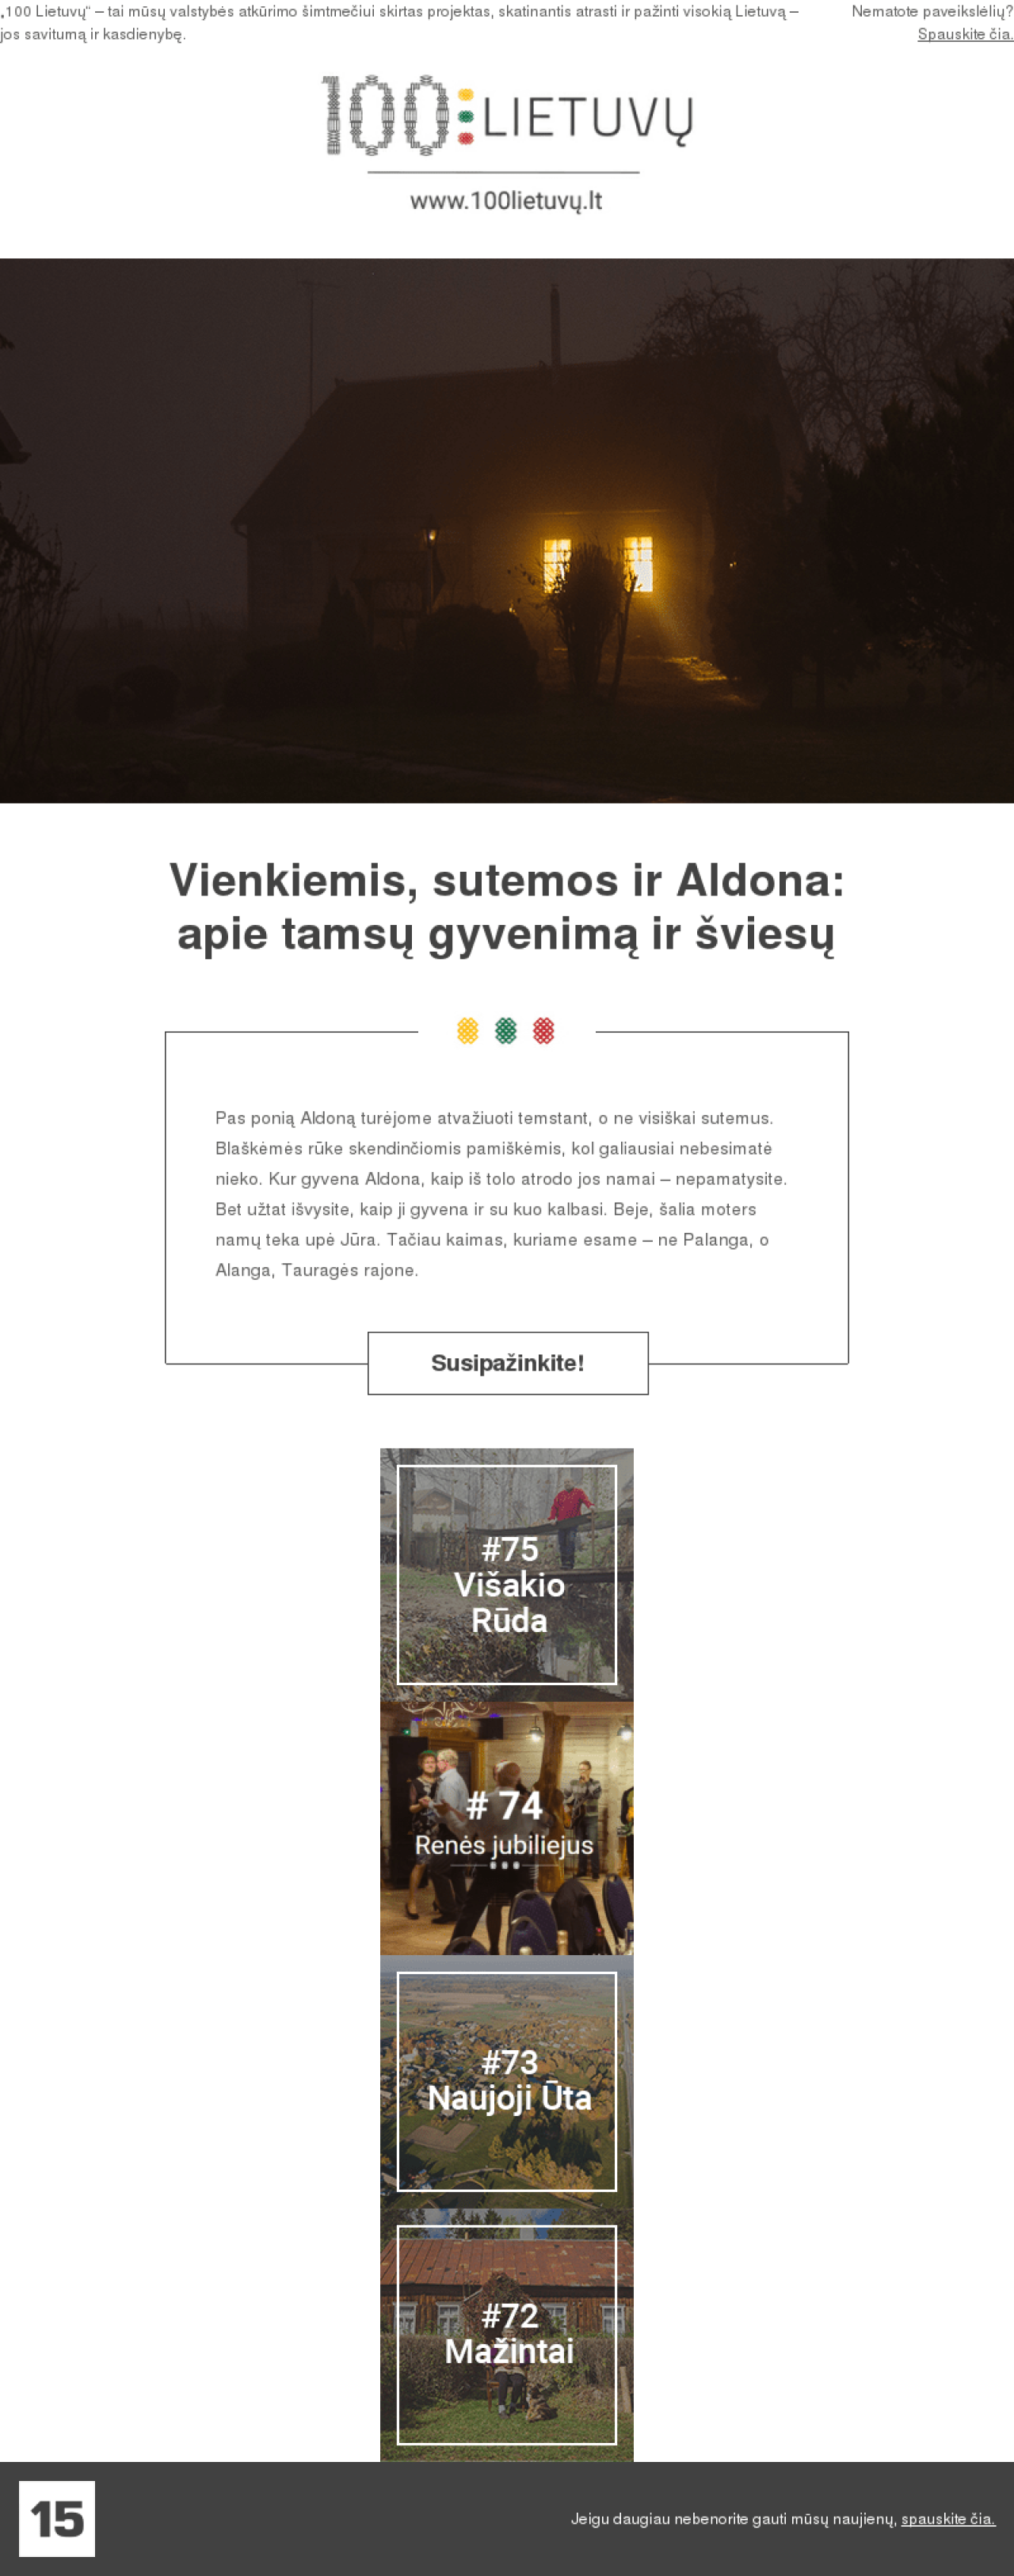 100 of Lithuanians example - Made with MailerLite